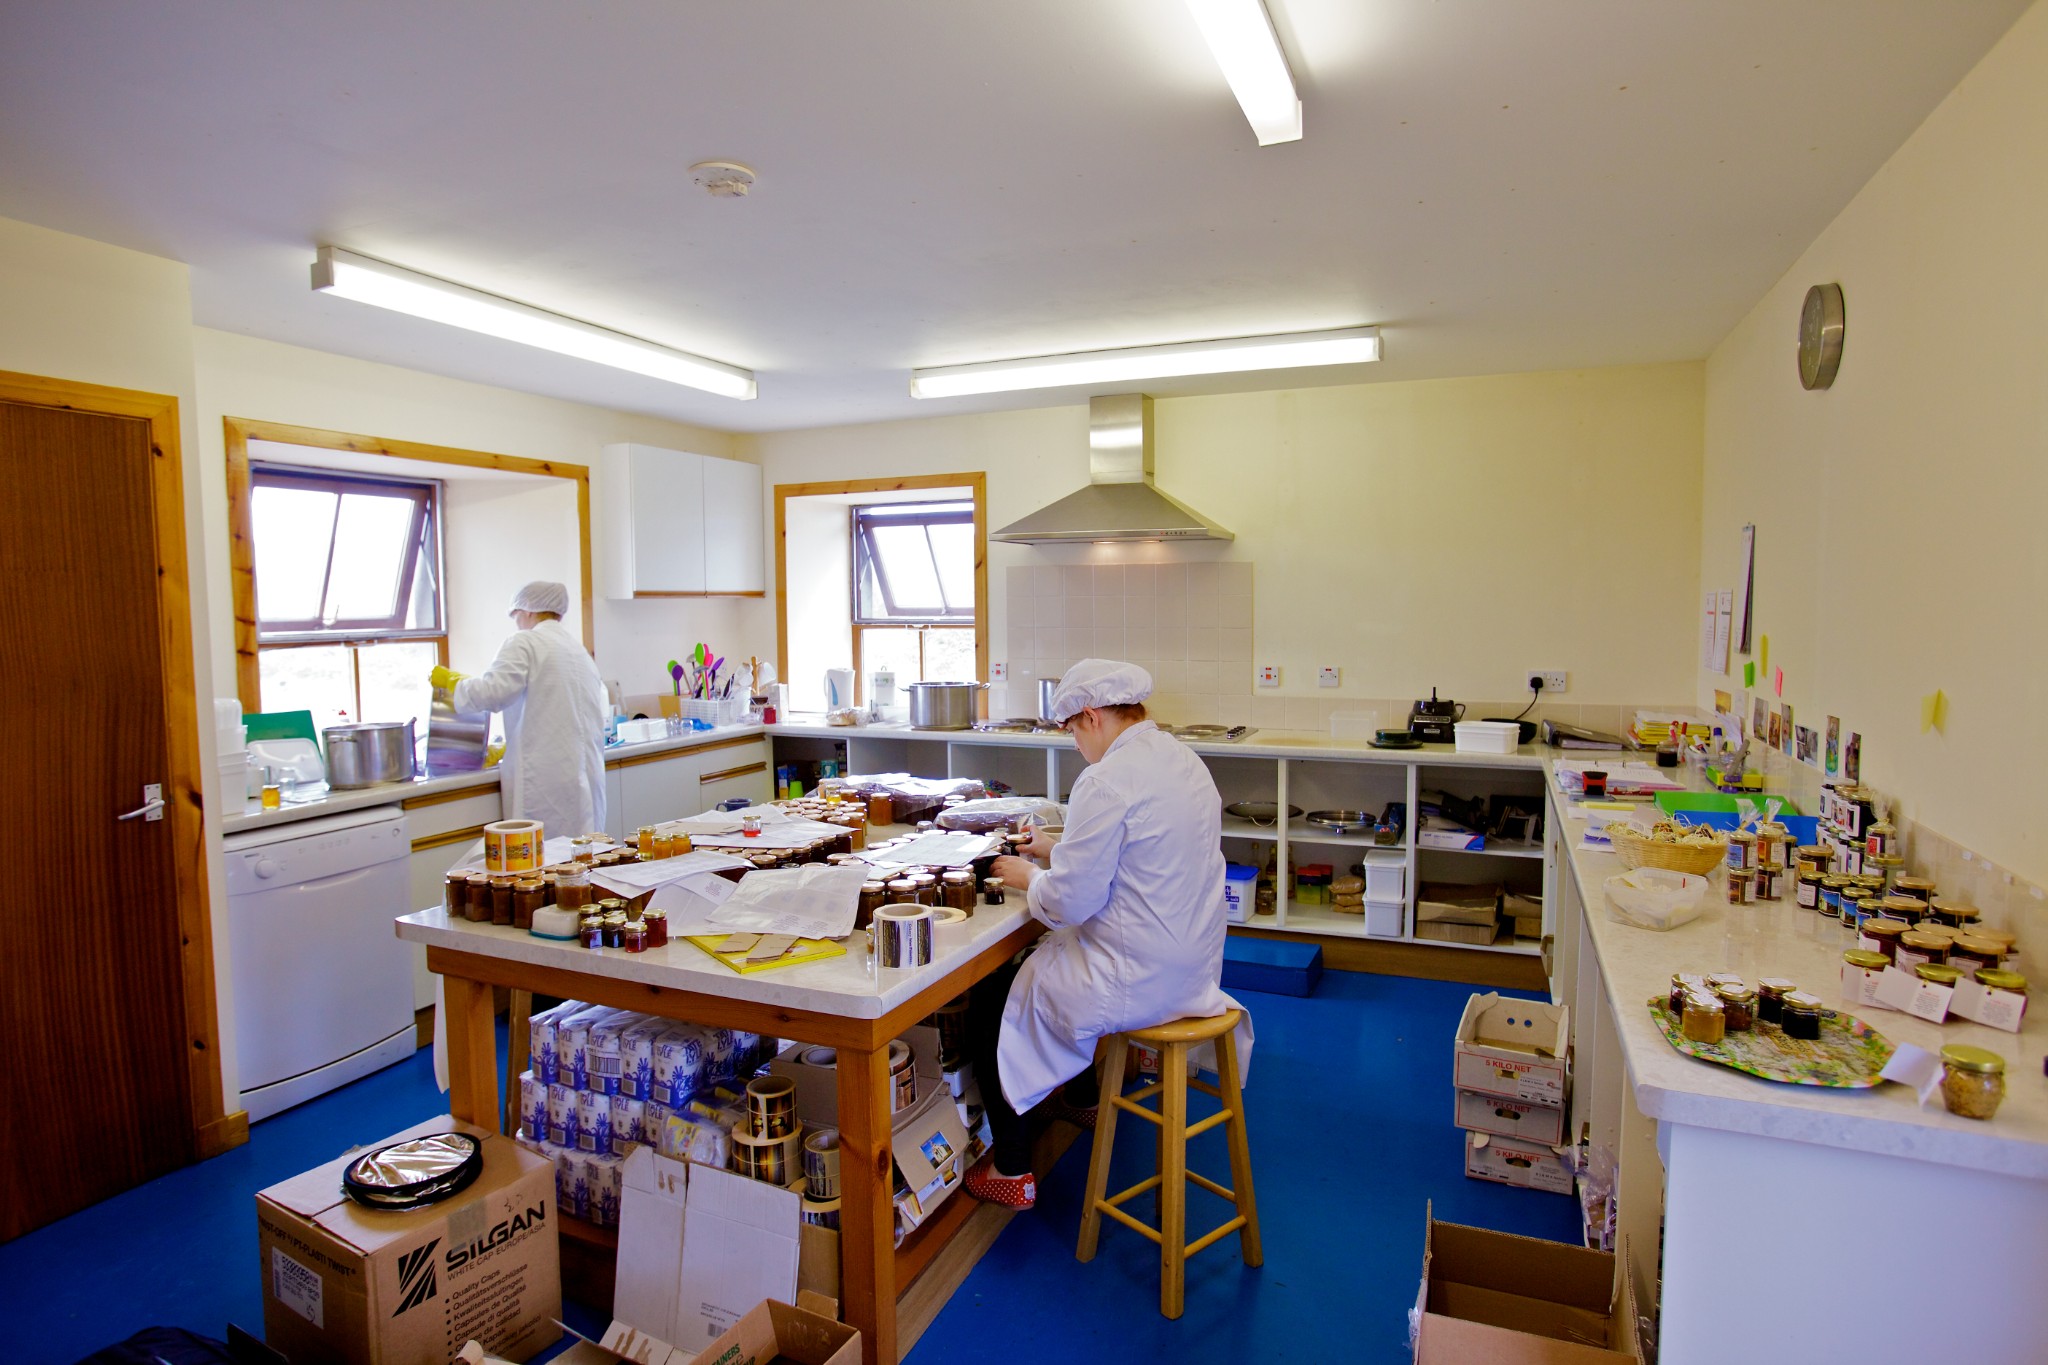 Inside the Orkney Isles Preserves kitchen